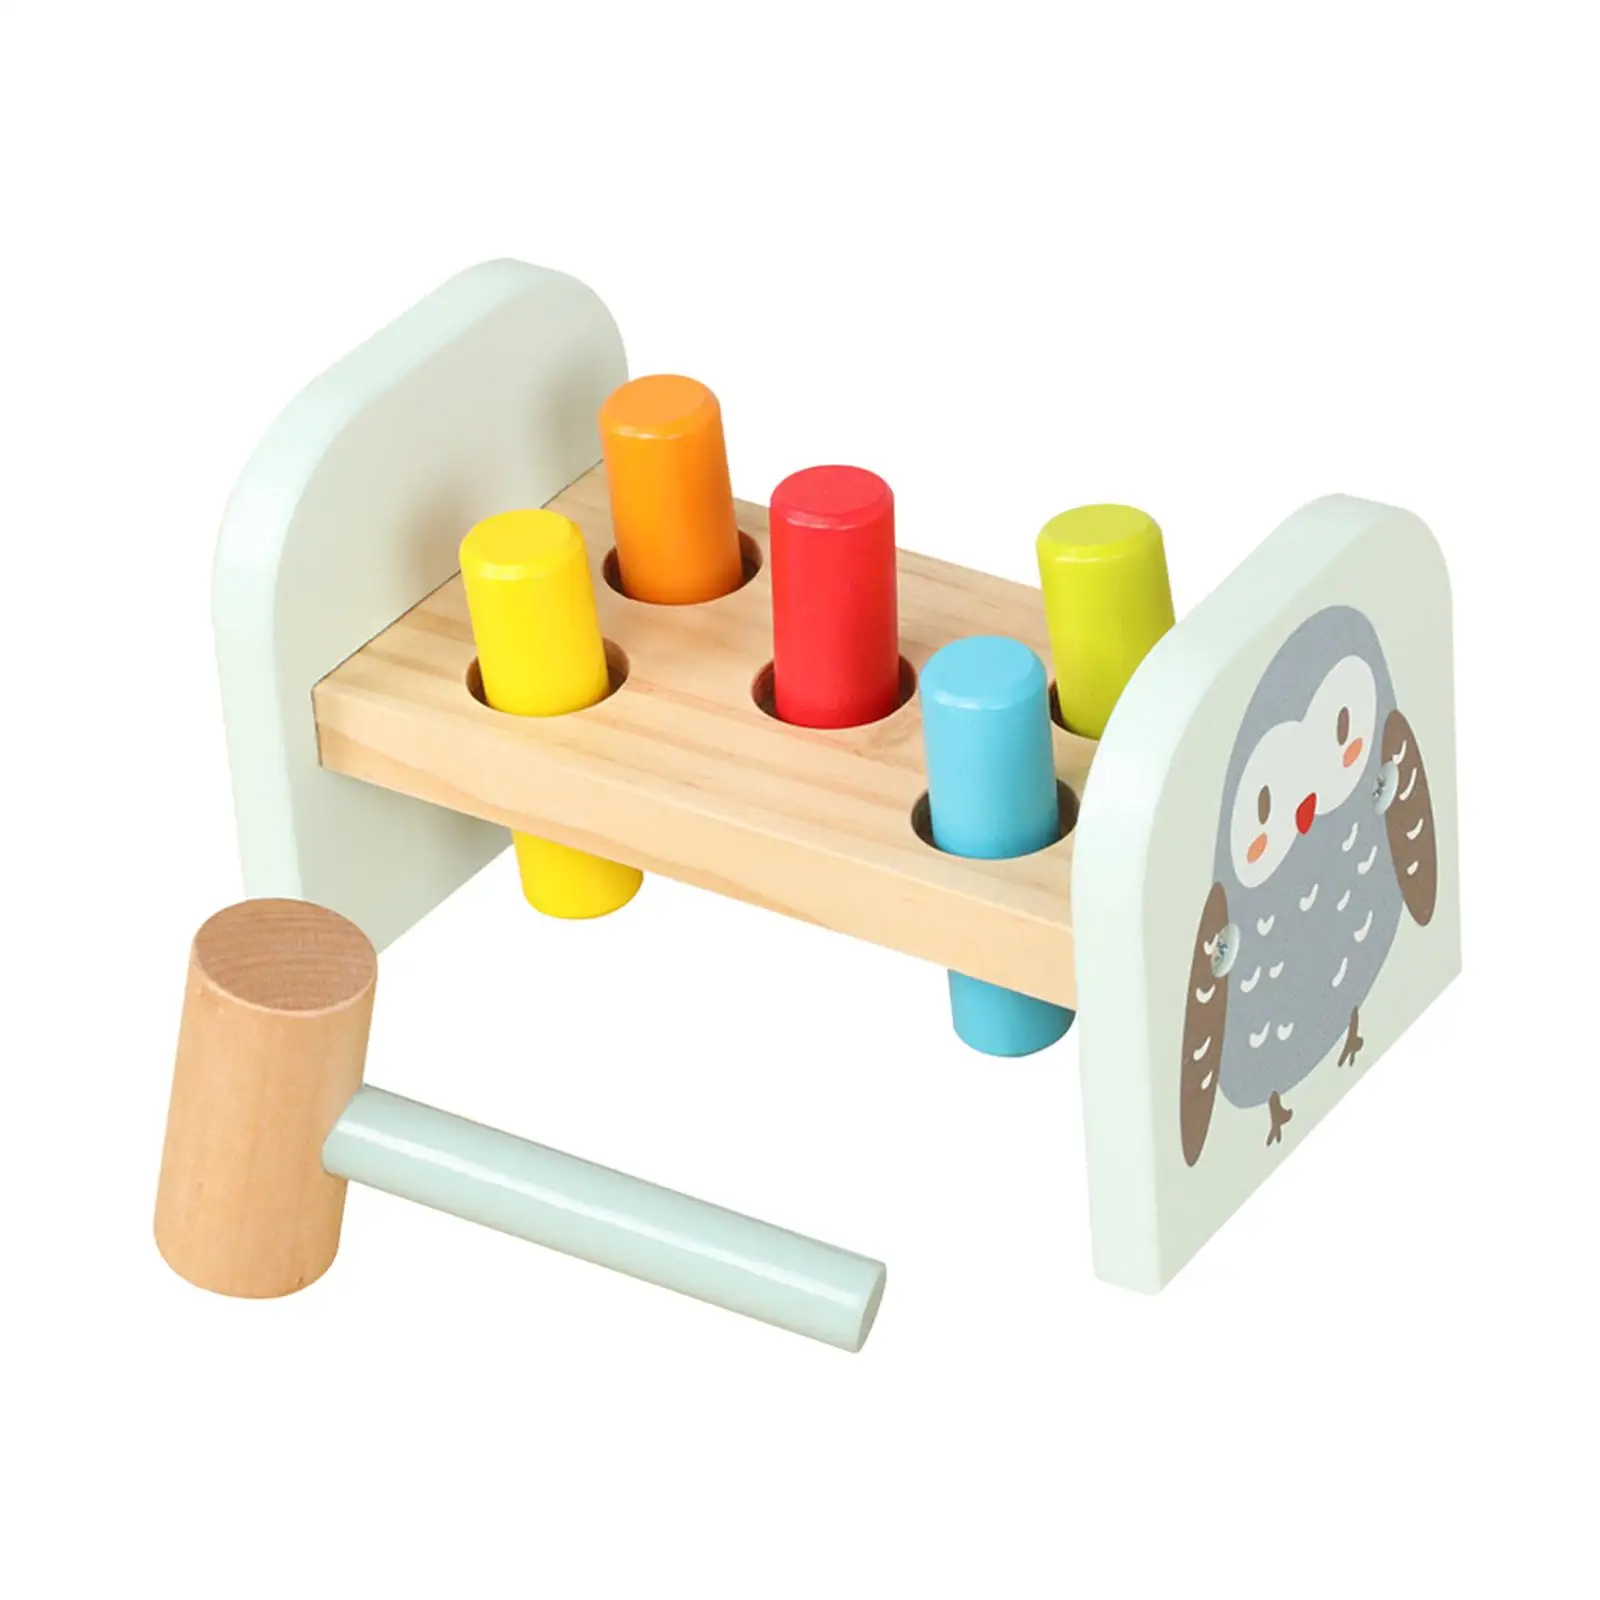 

Pounding Bench Wood Toy Hand Eye Coordination Color Cognitive with Mallet Wooden Pounding Bench for Party Favors Kids Preschool